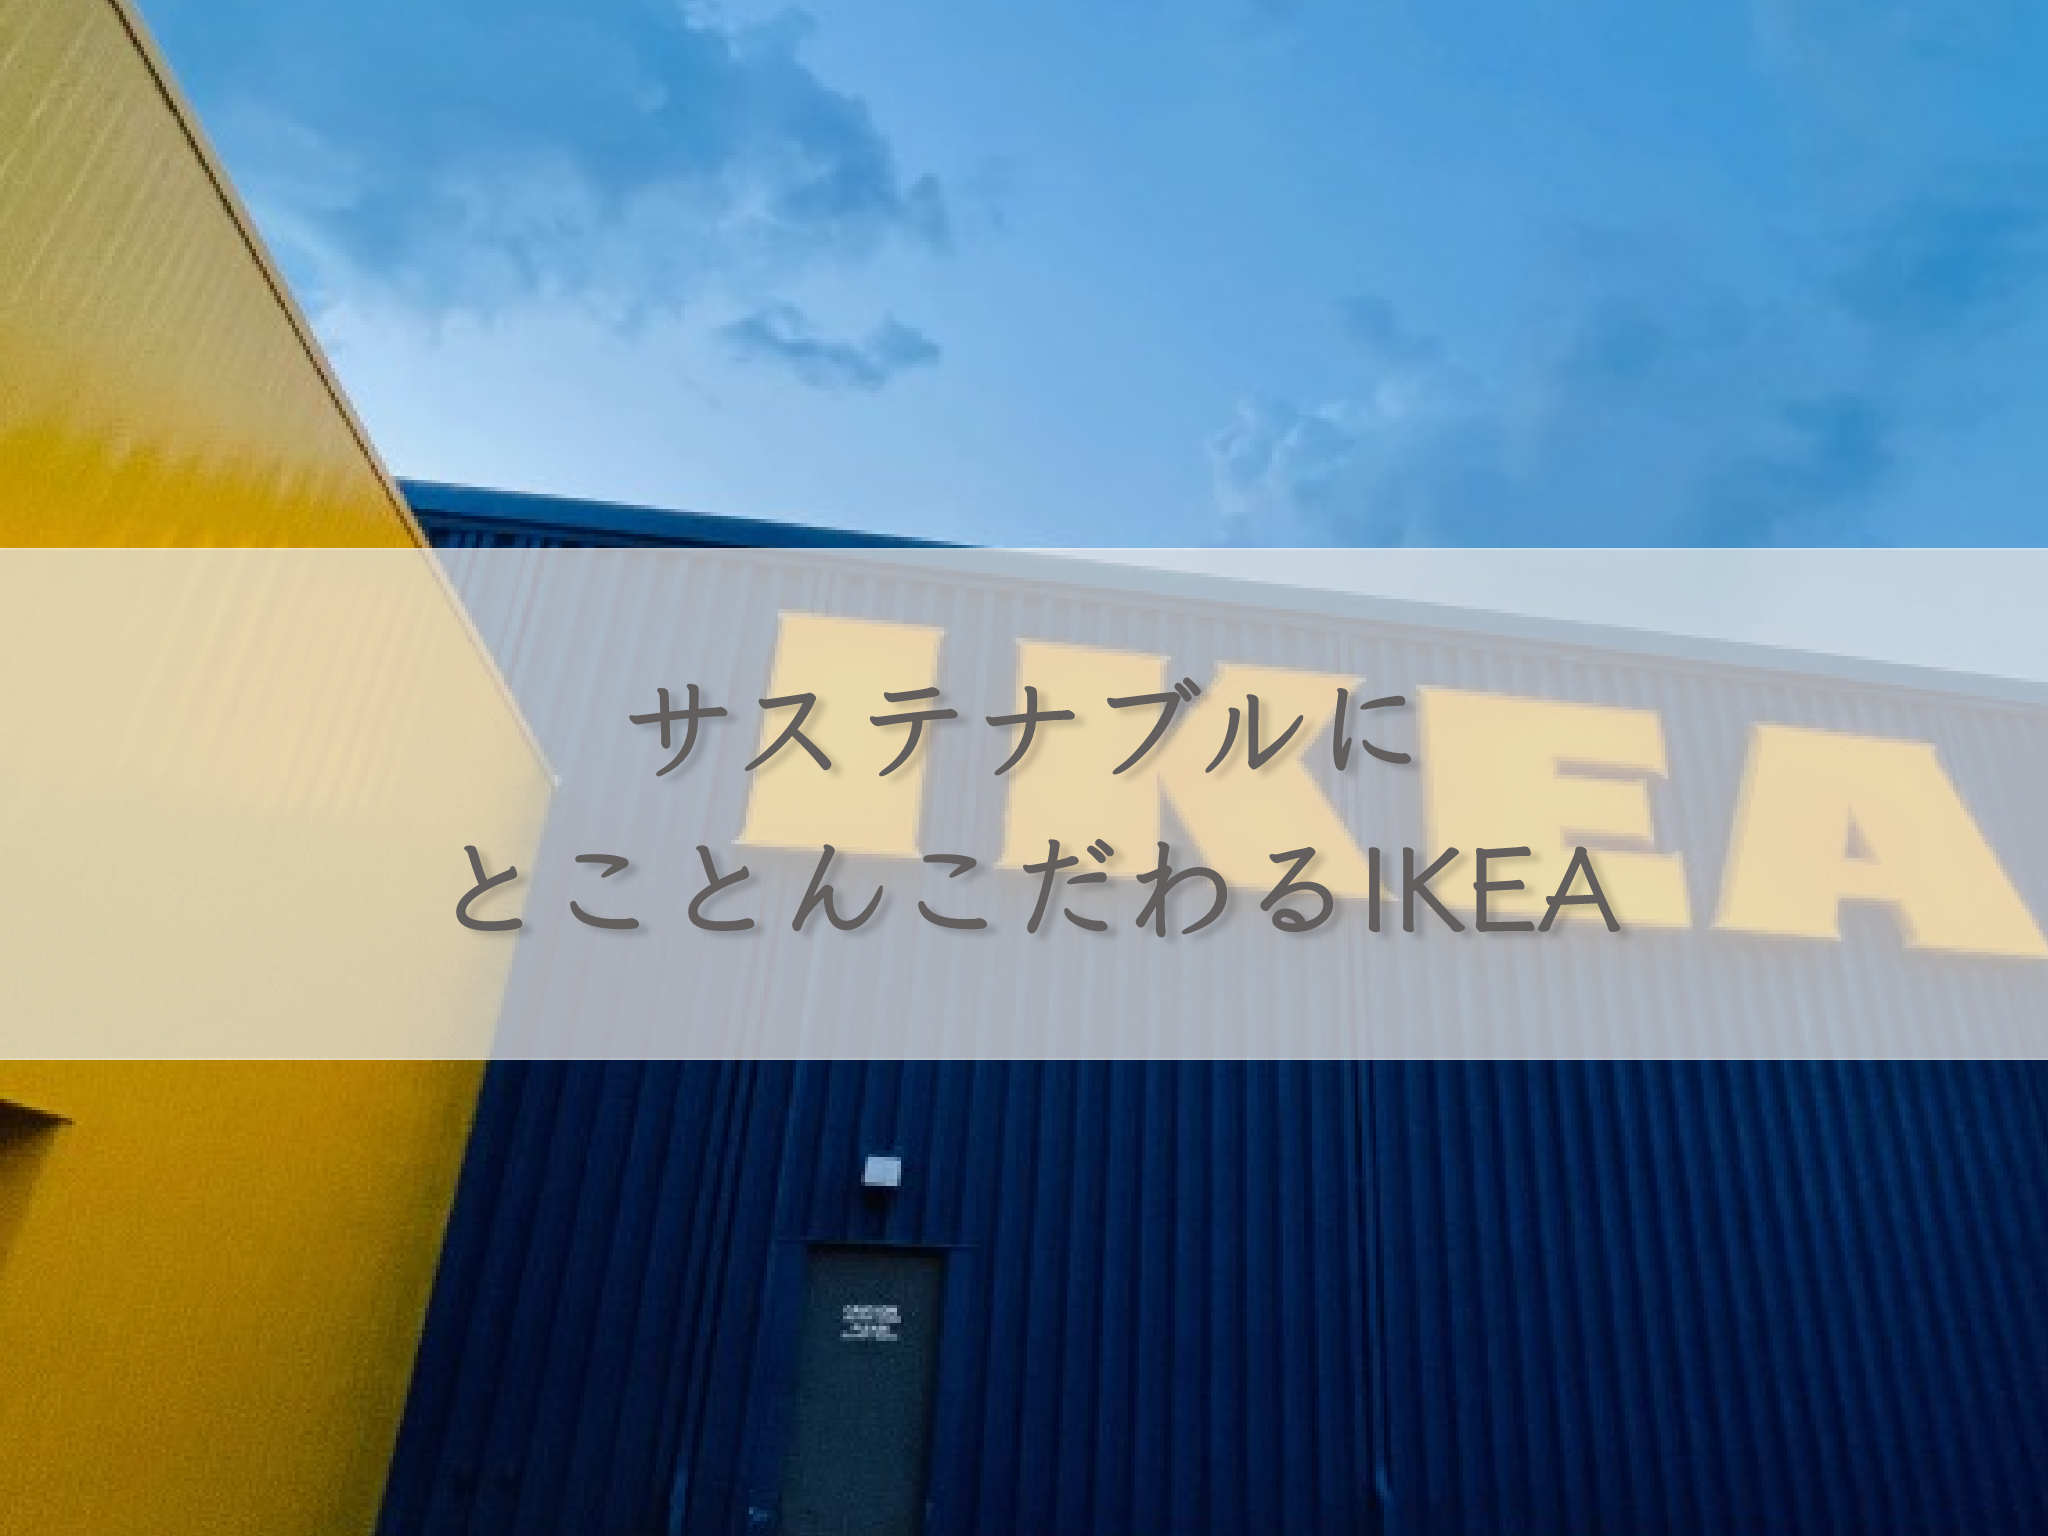 ikea-is-committed-to-being-sustainable